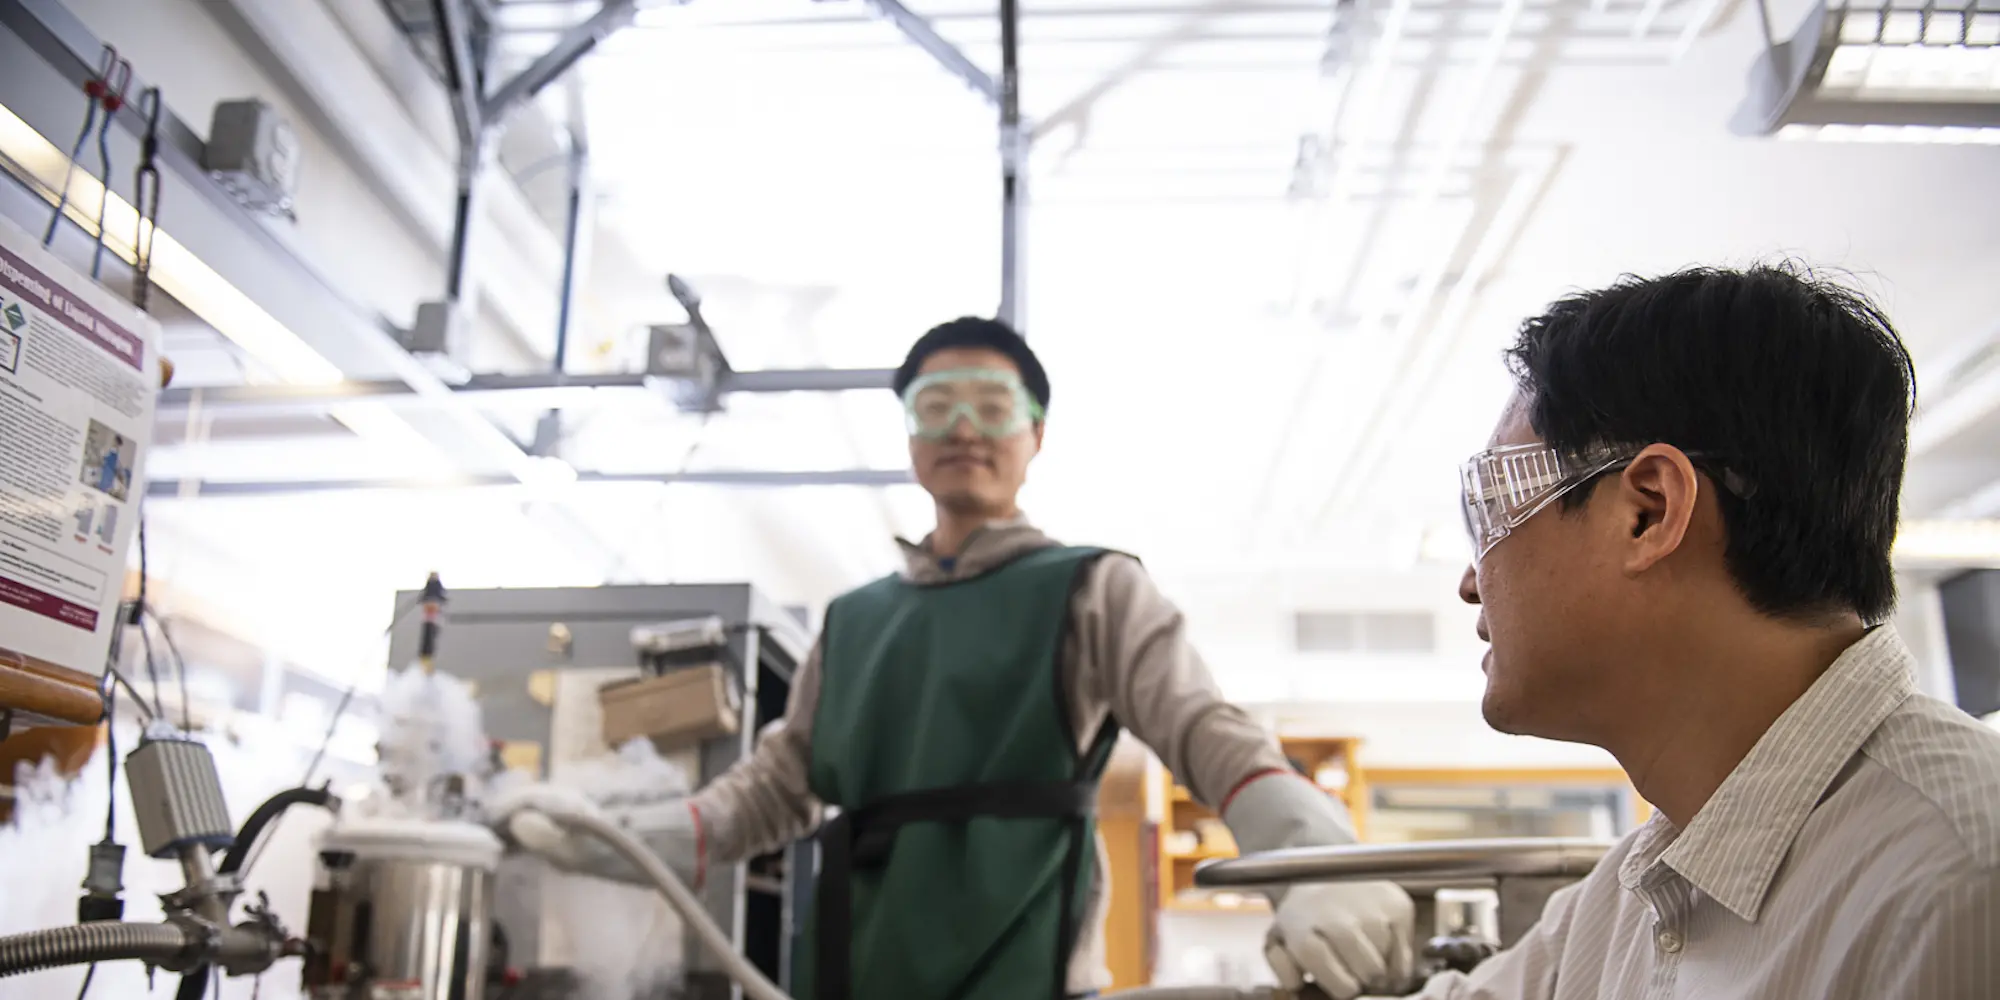 Student in a lab wearing protective lab gear, working with a cylinder of gas as professor Yisong Guo watches.